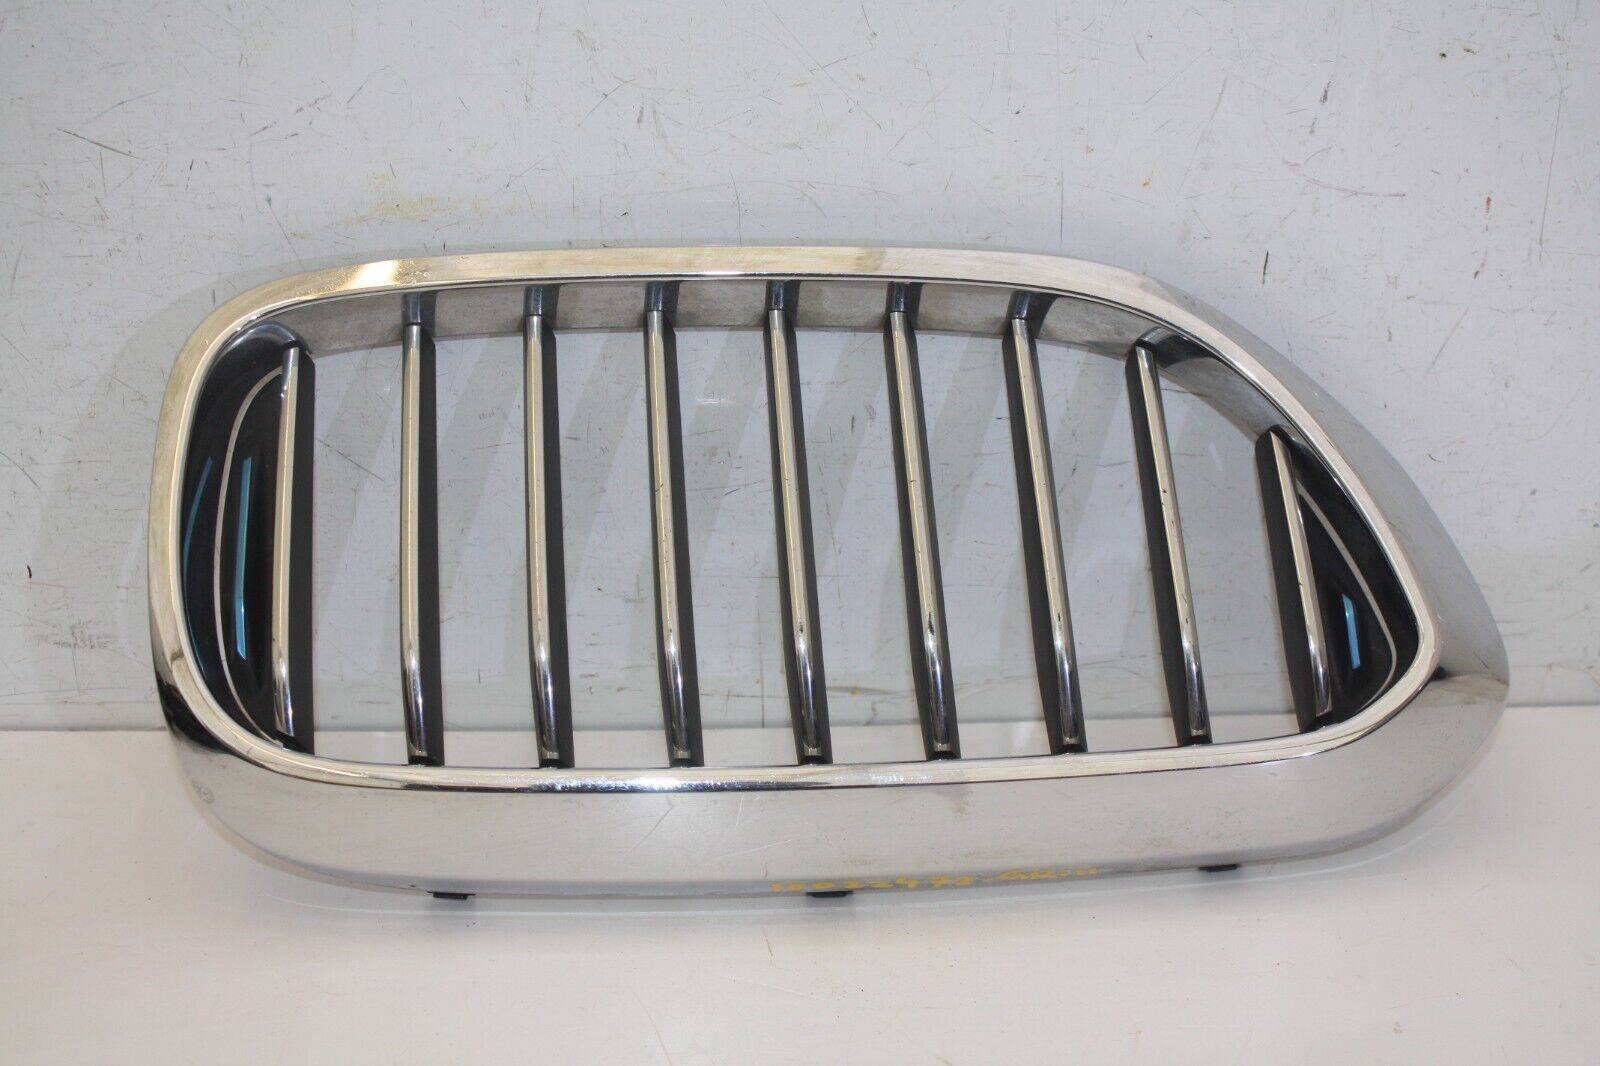 BMW-5-Series-G30-G31-Front-Bumper-Right-Kidney-Grill-2017-TO-2020-7383520-176234548246